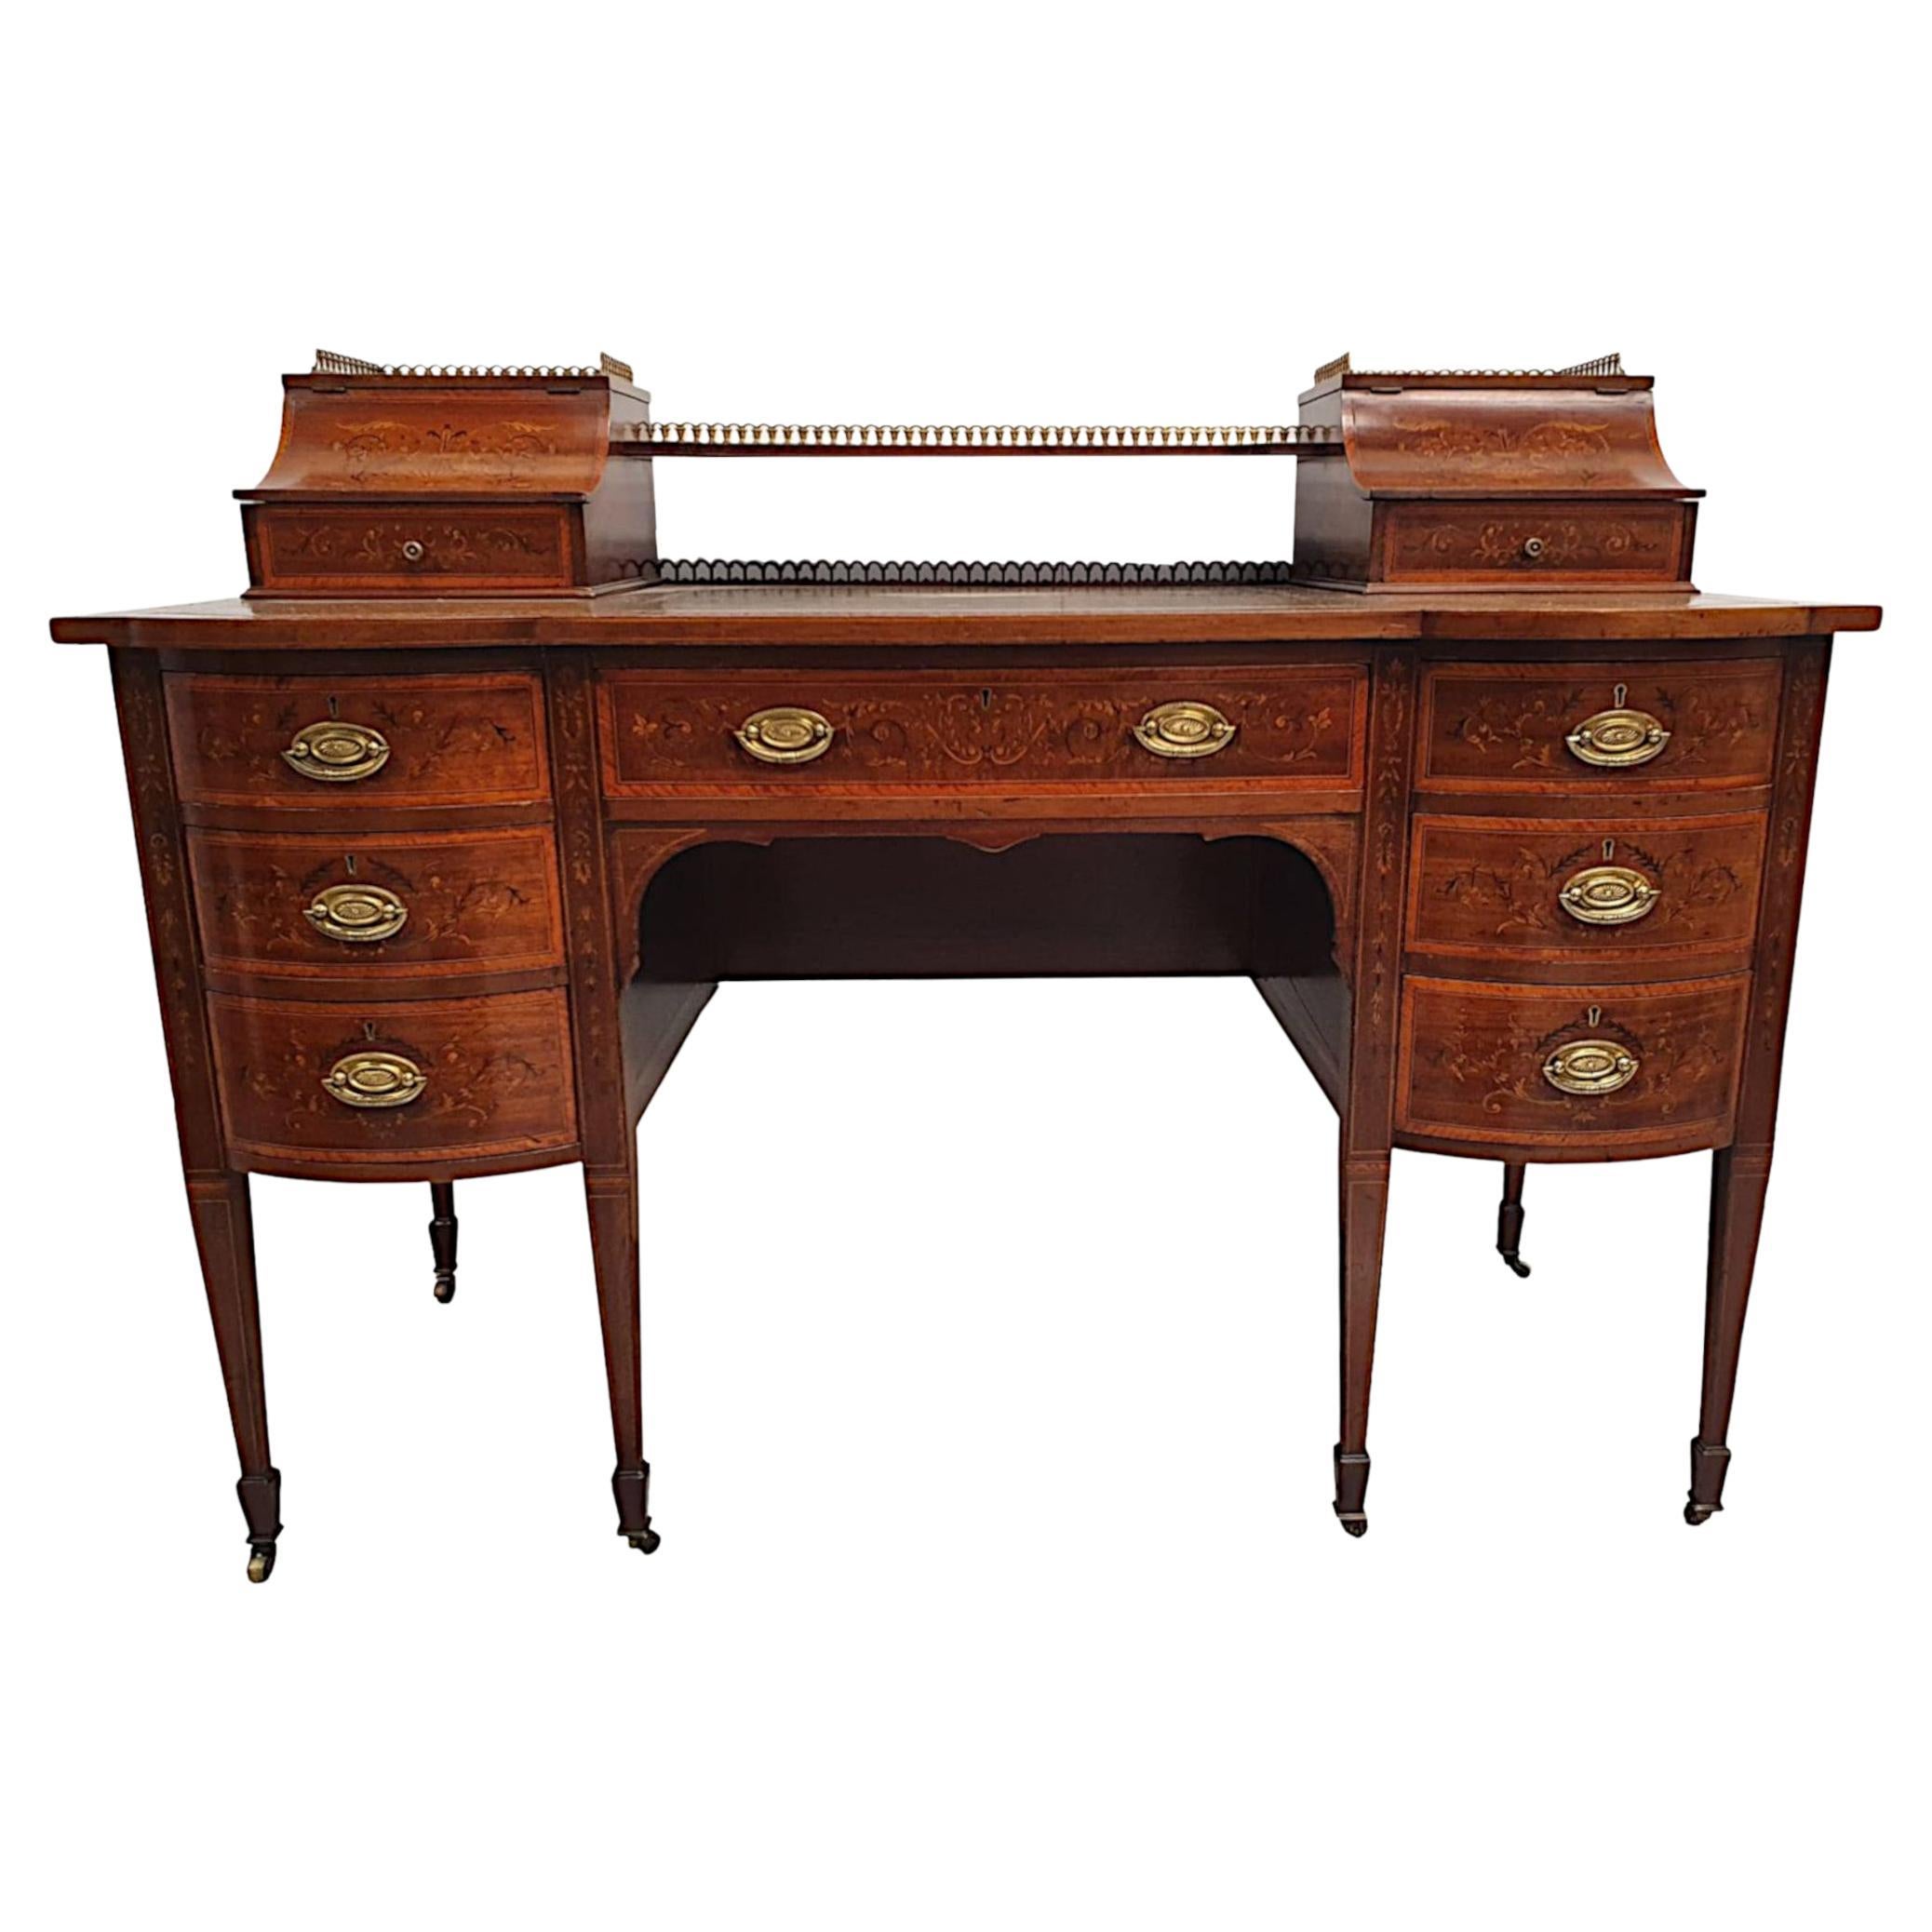 A Stunning Edwardian Desk in the Carlton House Style by Maple of London For Sale